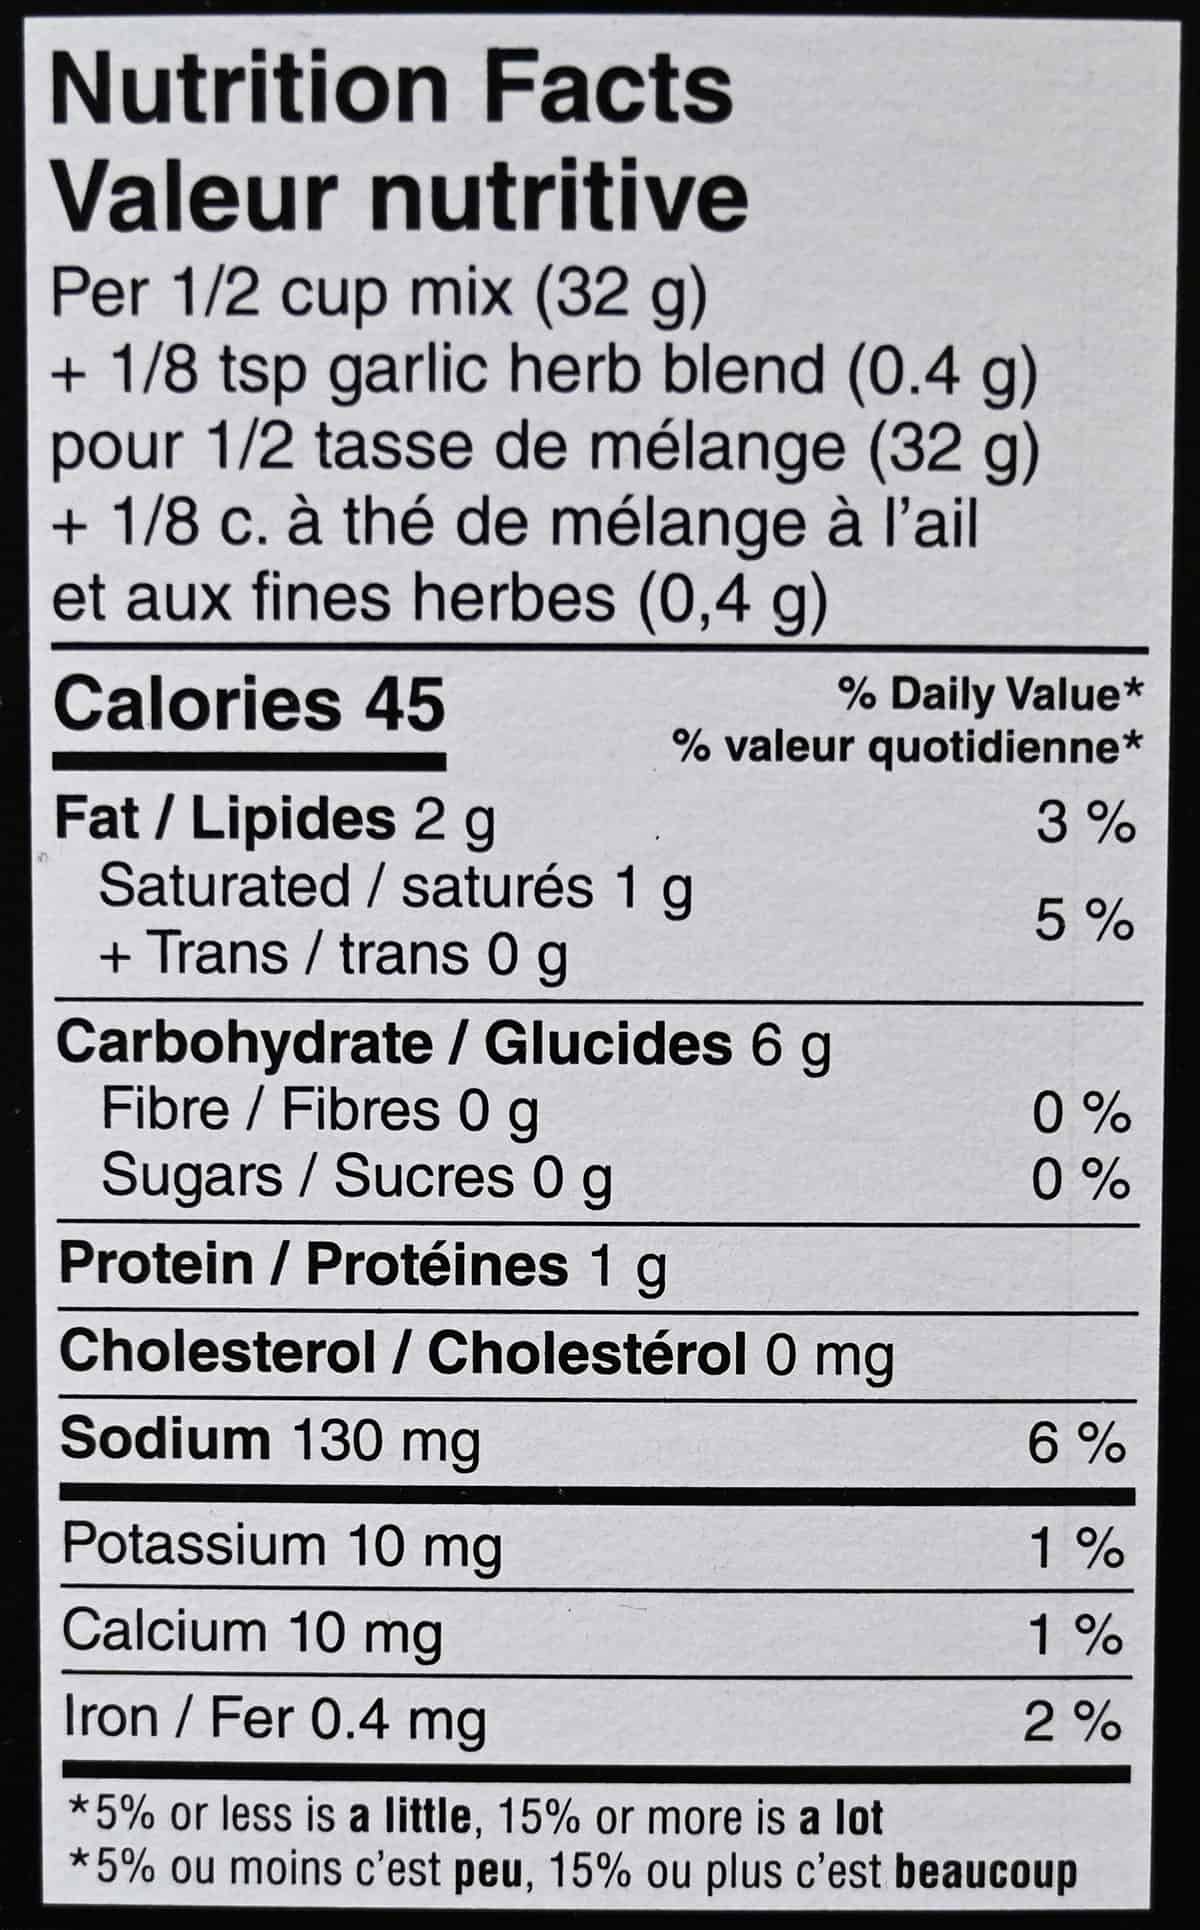 Image of the nutrition facts for the biscuits from the back of the box.